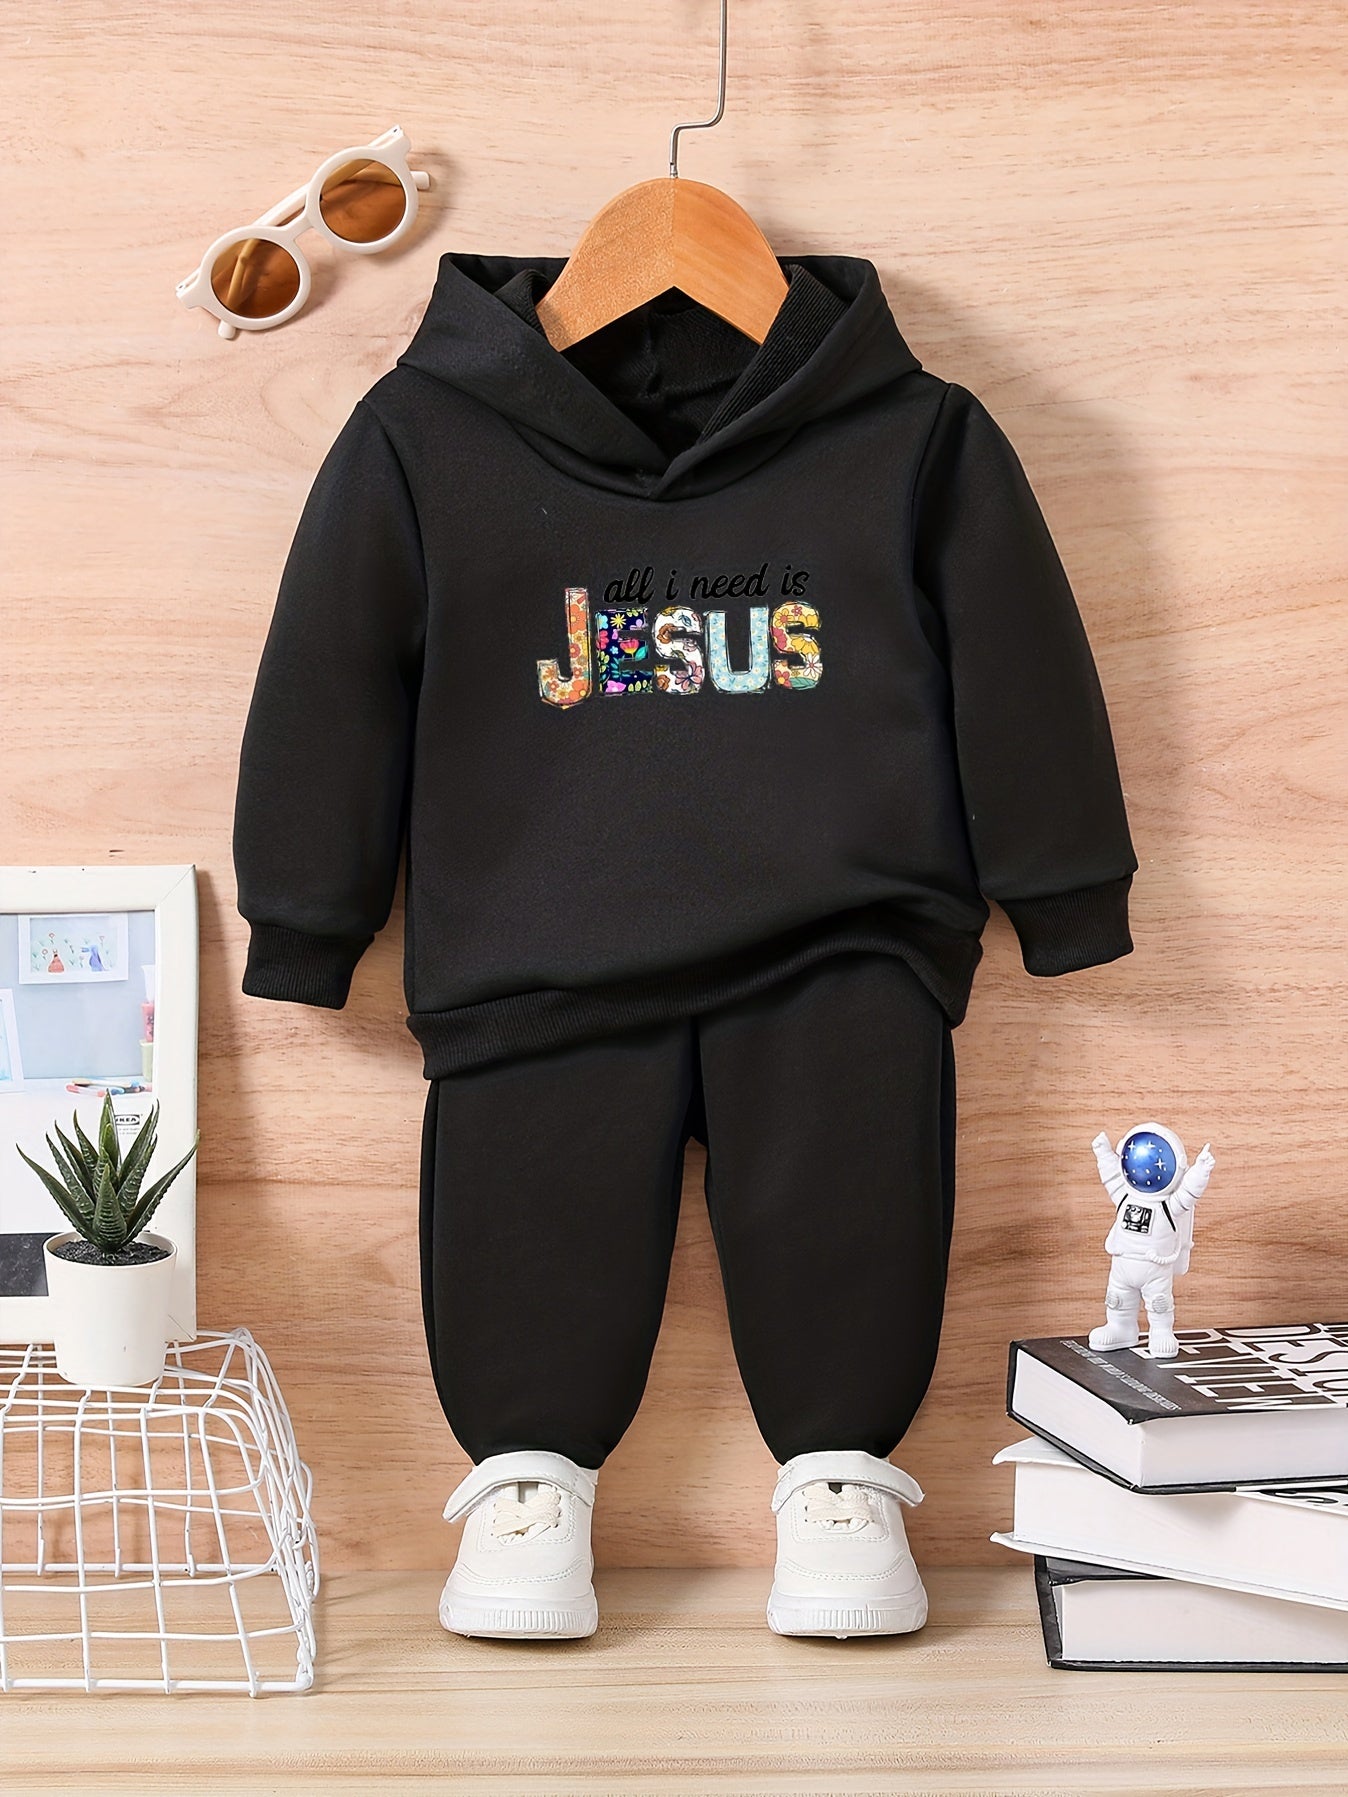 All I Need Is Jesus Toddler Christian Casual Outfit claimedbygoddesigns